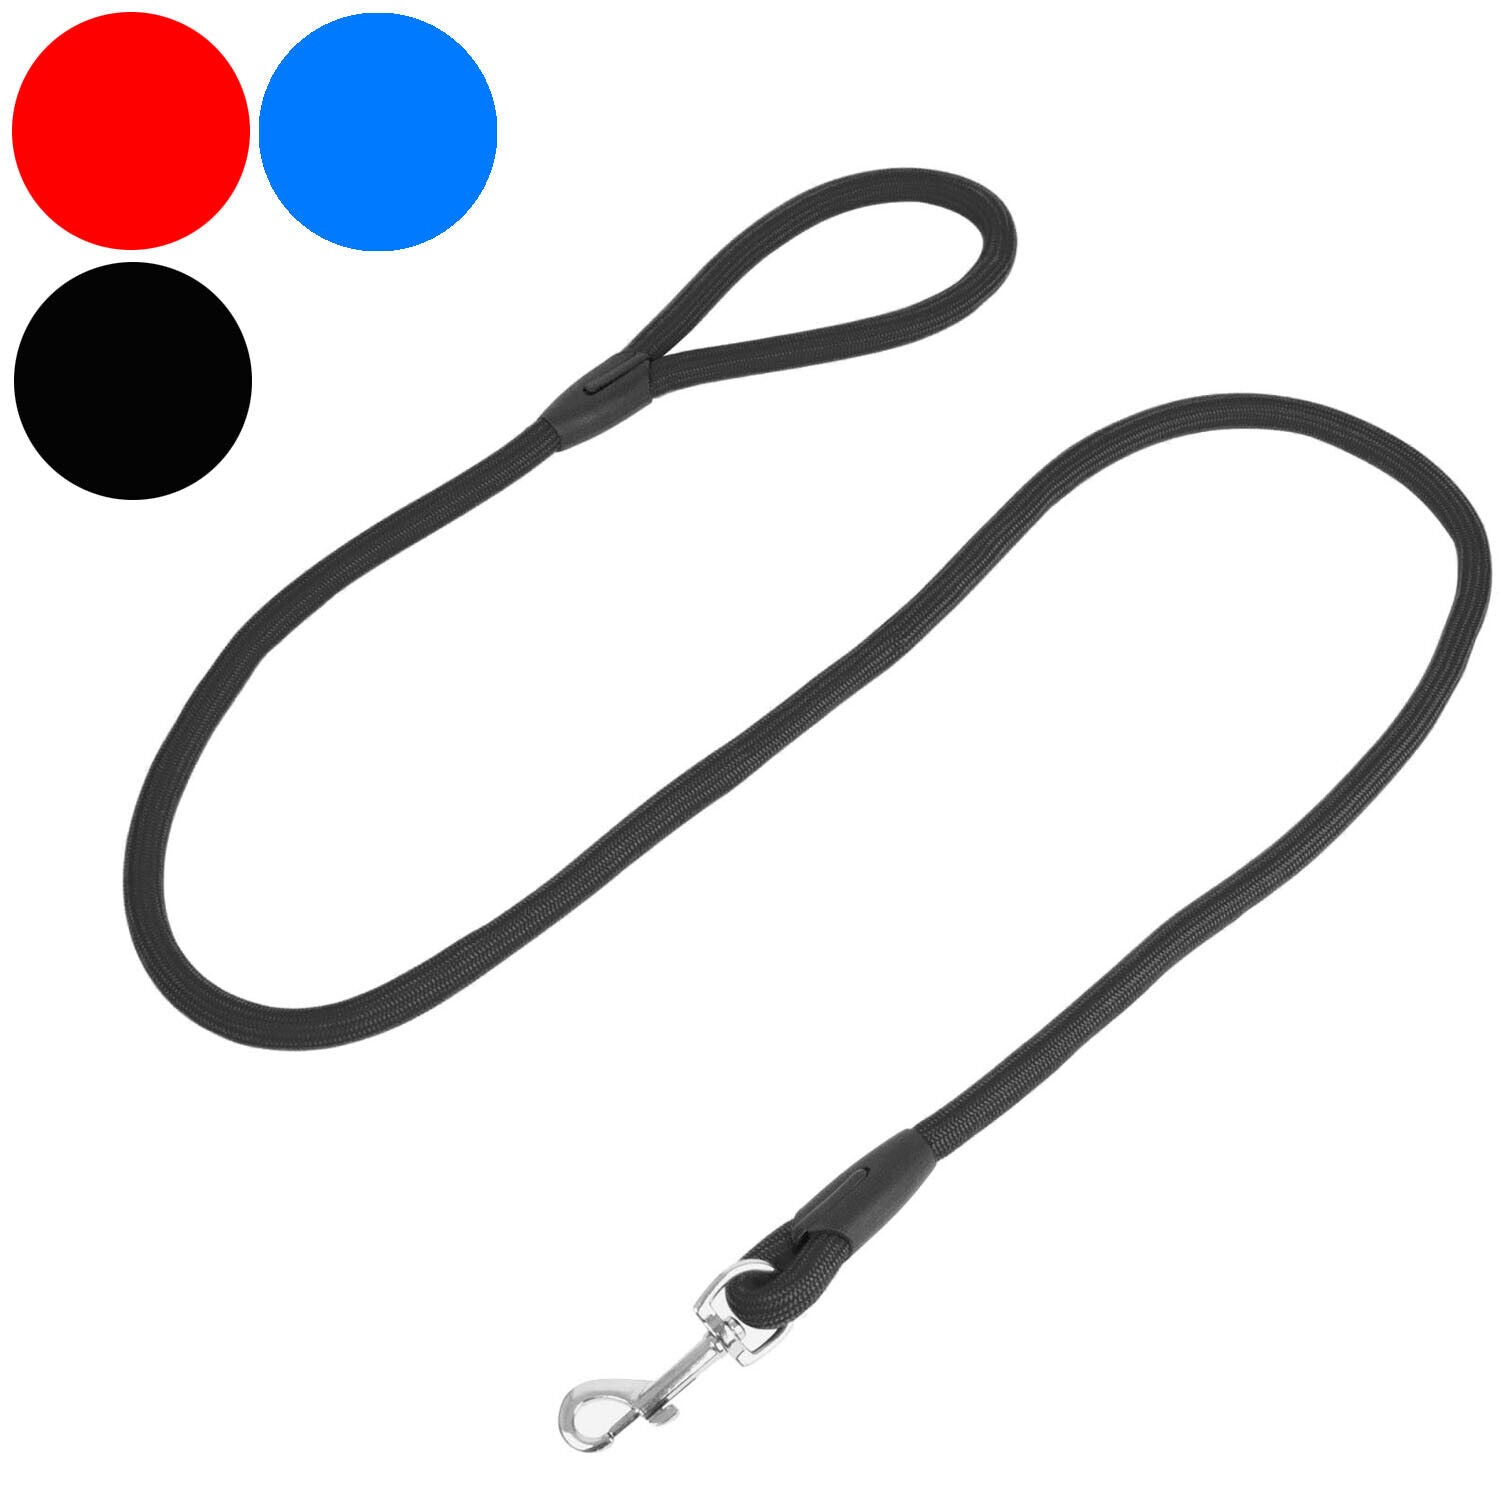 Dog Rope Lead Strong Pet Leash with Clip for Collar and Harness Red Blue Black